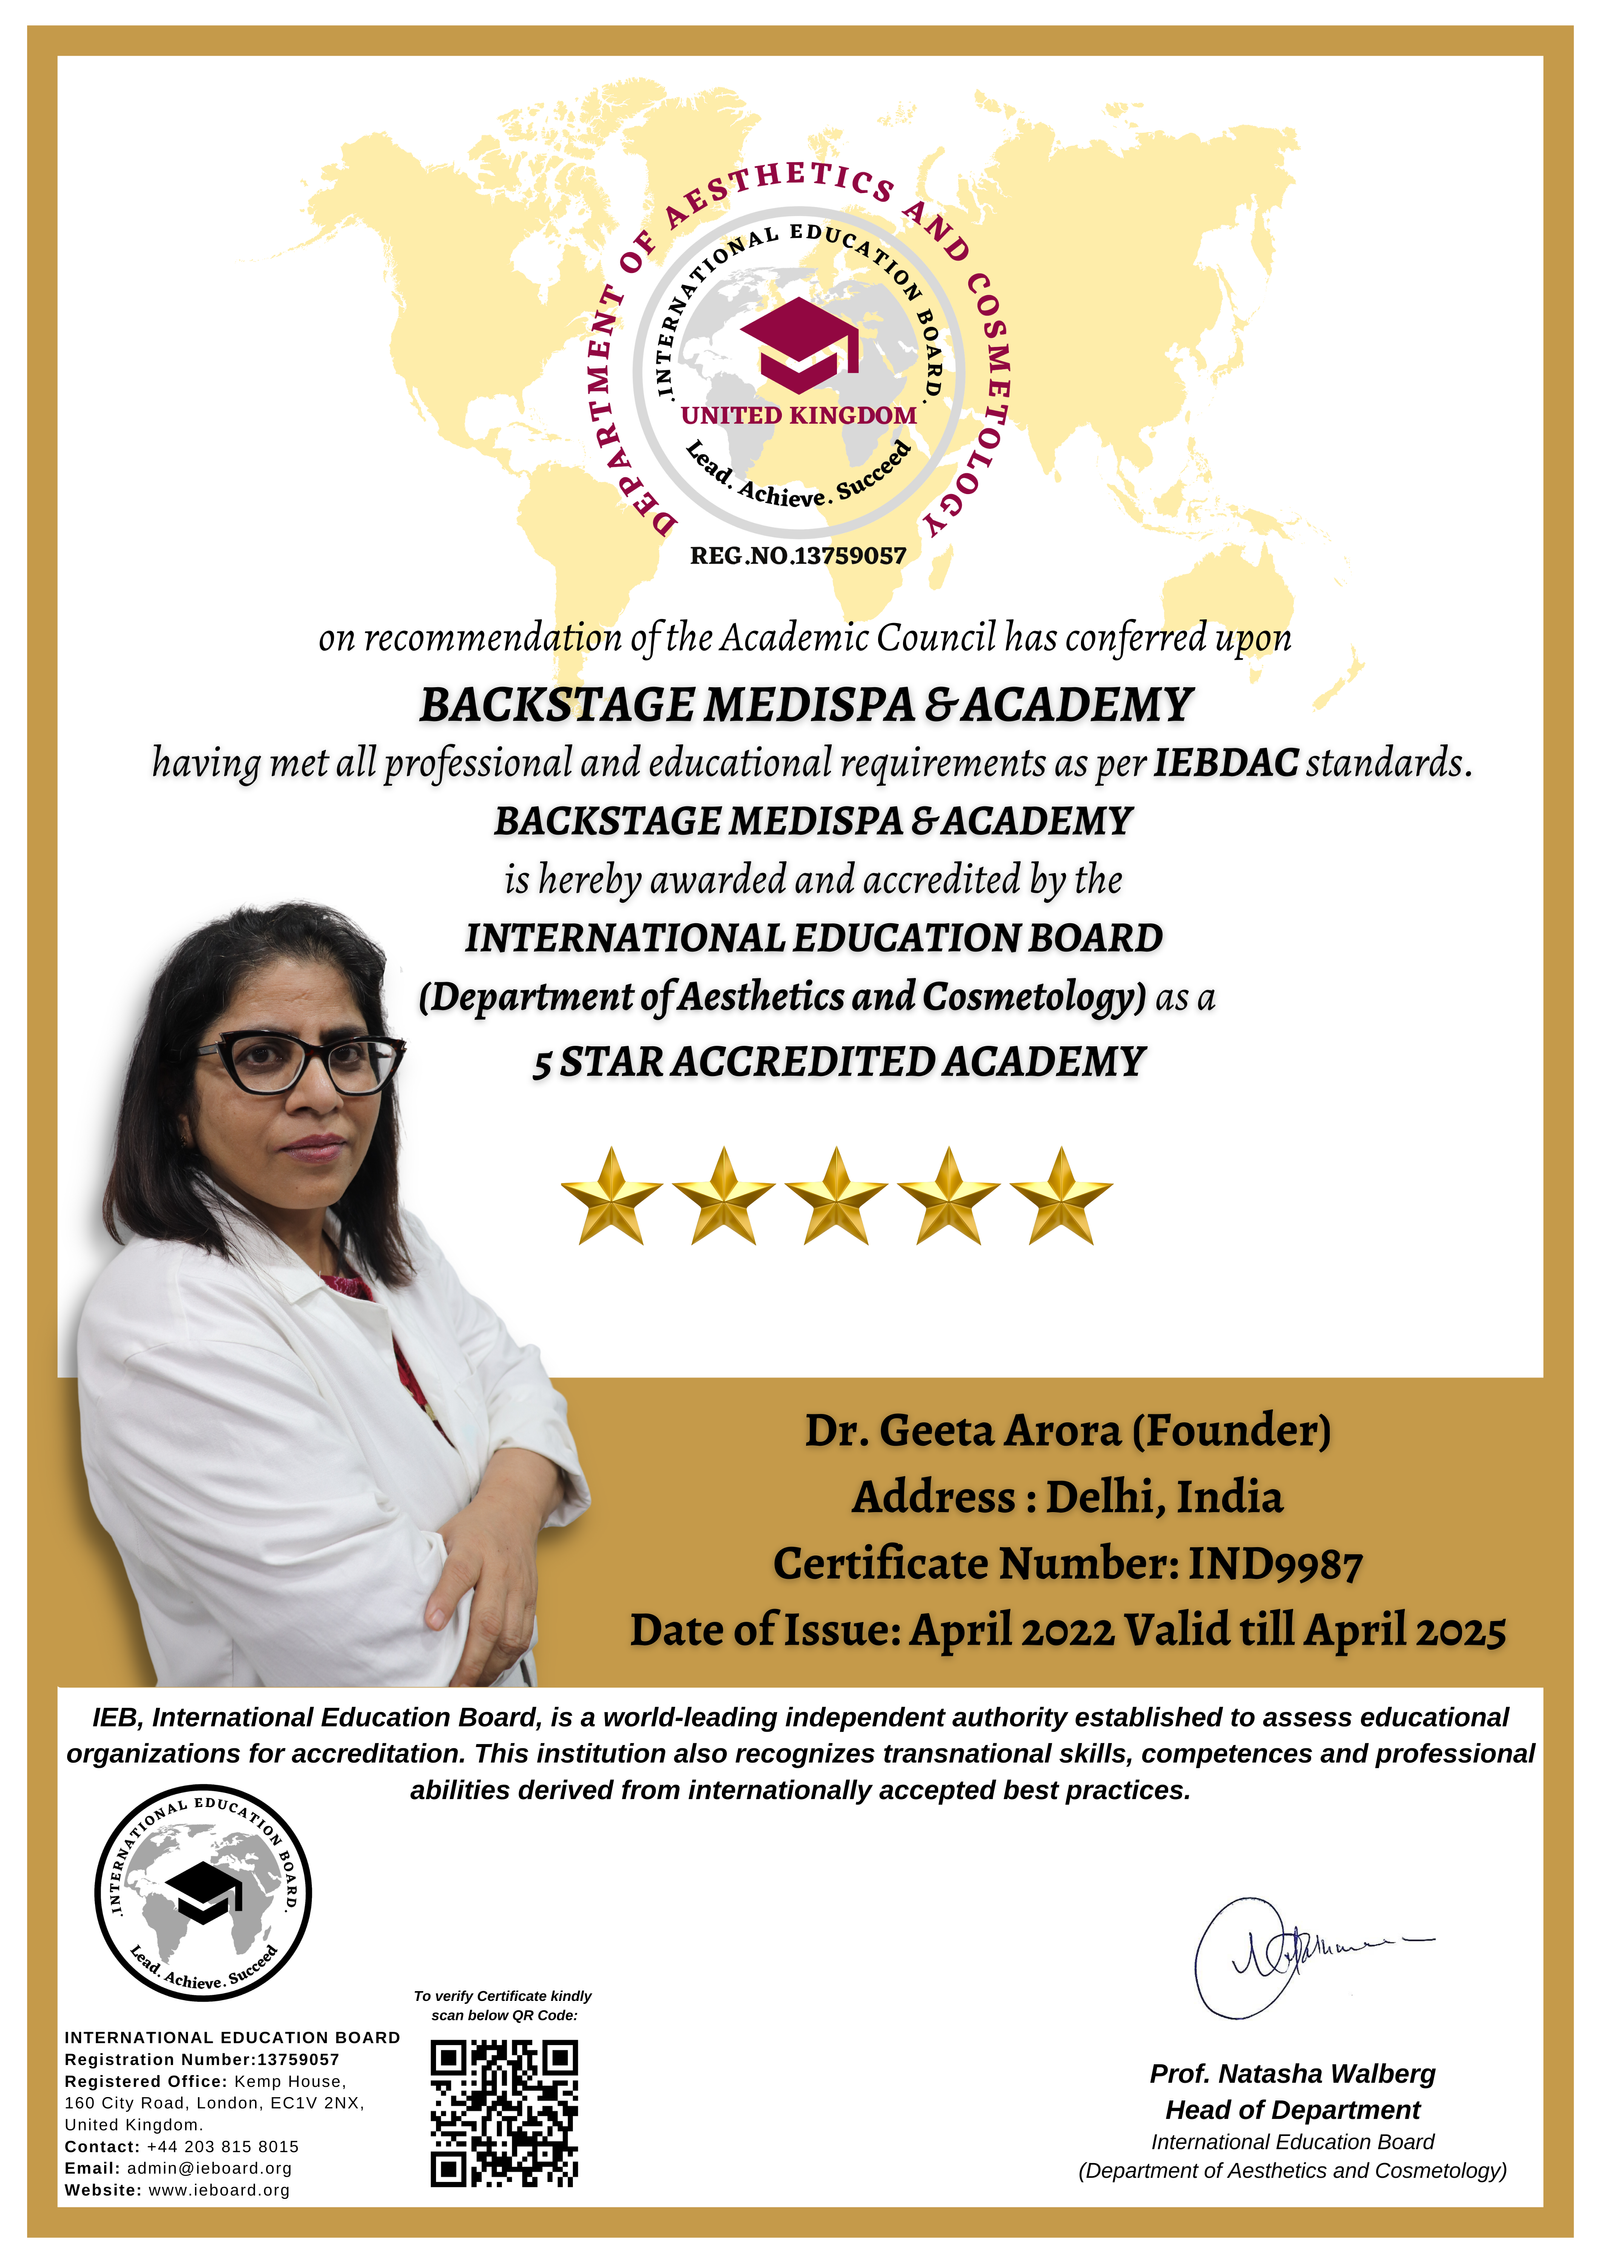 backstage academy dr geeta arora accredited delhi cosmetic gynaecology course